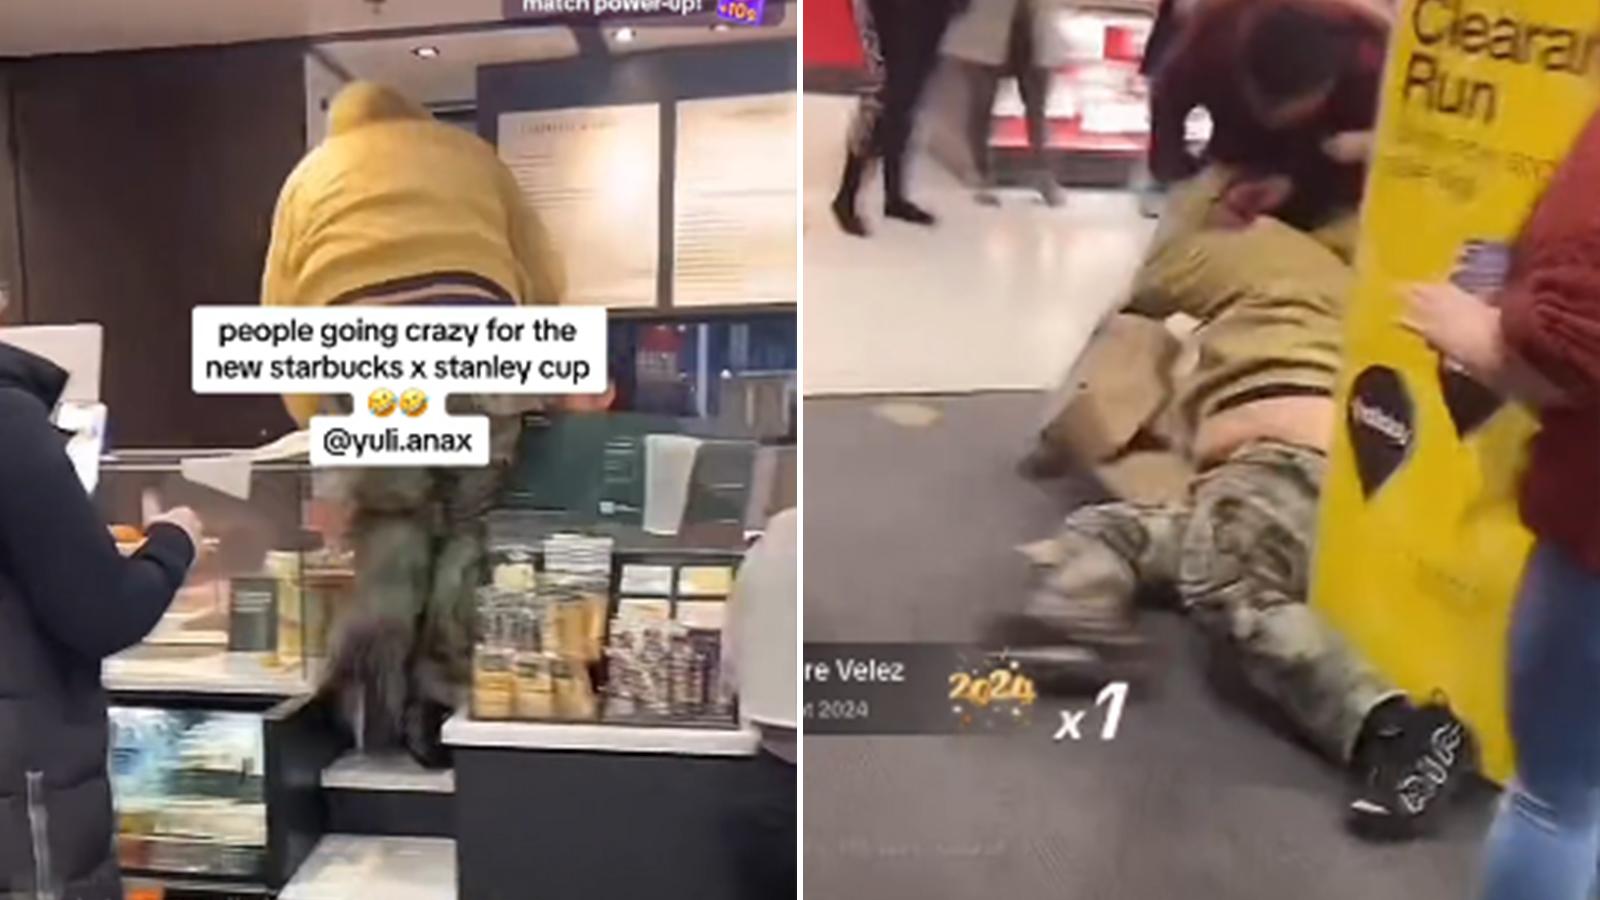 Man jumps Starbucks counter to steal Stanley cup in chaotic viral TikTok -  Dexerto